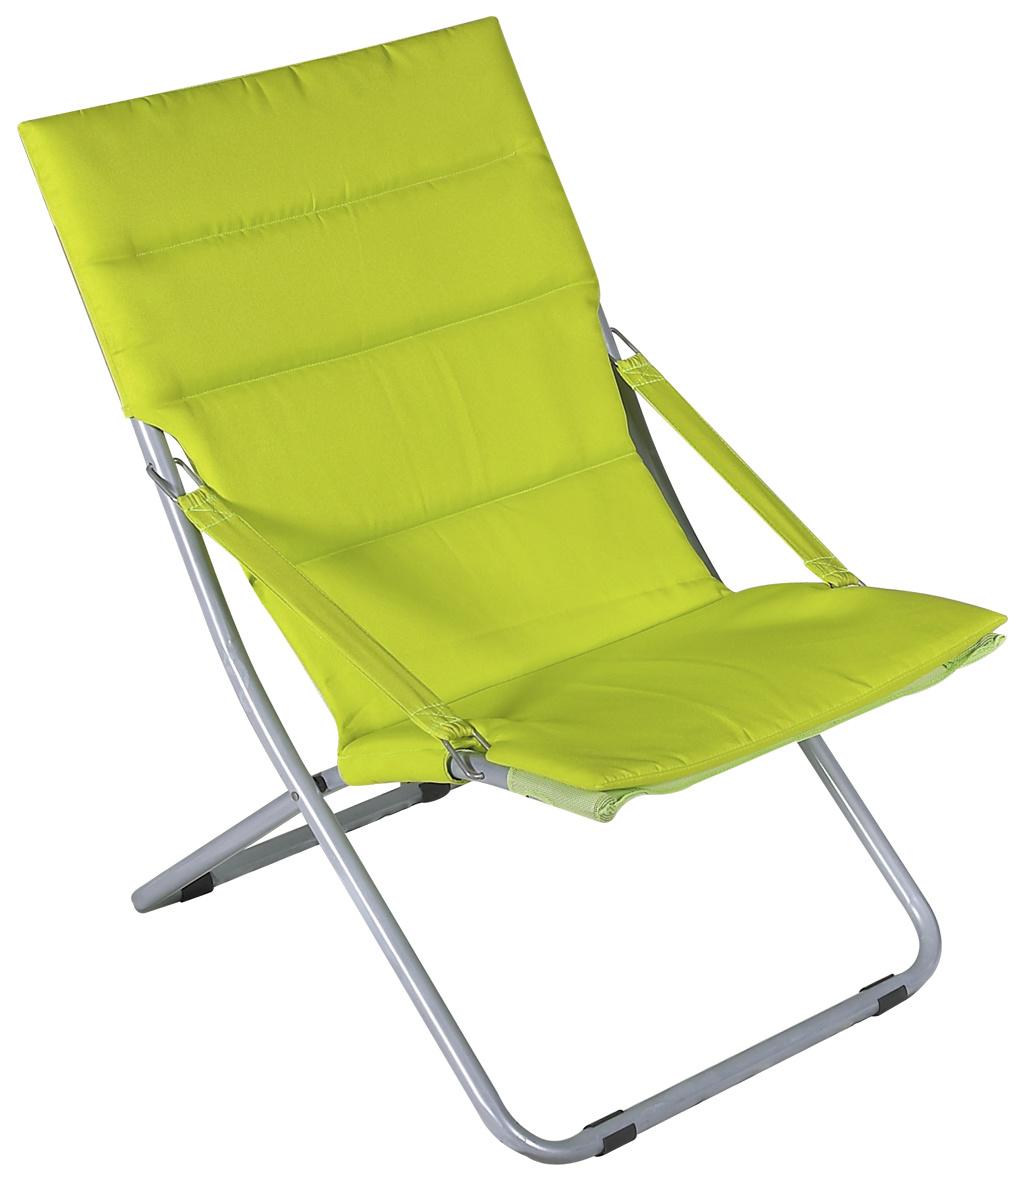 Outsunny Folding Camping Beach Chair Portable Outdoor Travel Seat Oxford Fabric